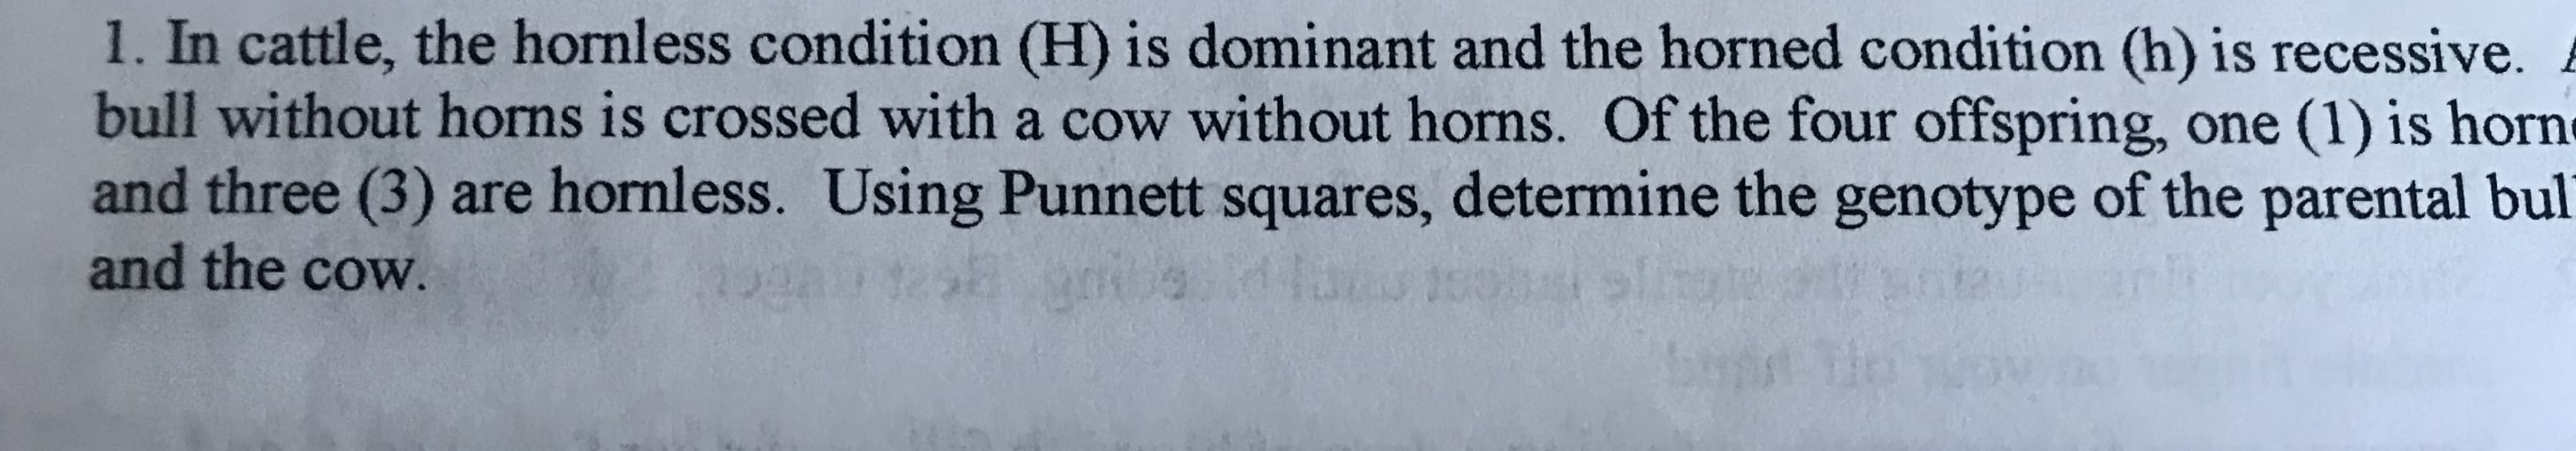 1. In cattle, the hornless condition (H) is dominant and the horned condition (h) is recessive.
bull without horns is crossed with a cow without horns. Of the four offspring, one (1) is horn
and three (3) are hornless. Using Punnett squares, determine the genotype of the parental bul
and the cow.
